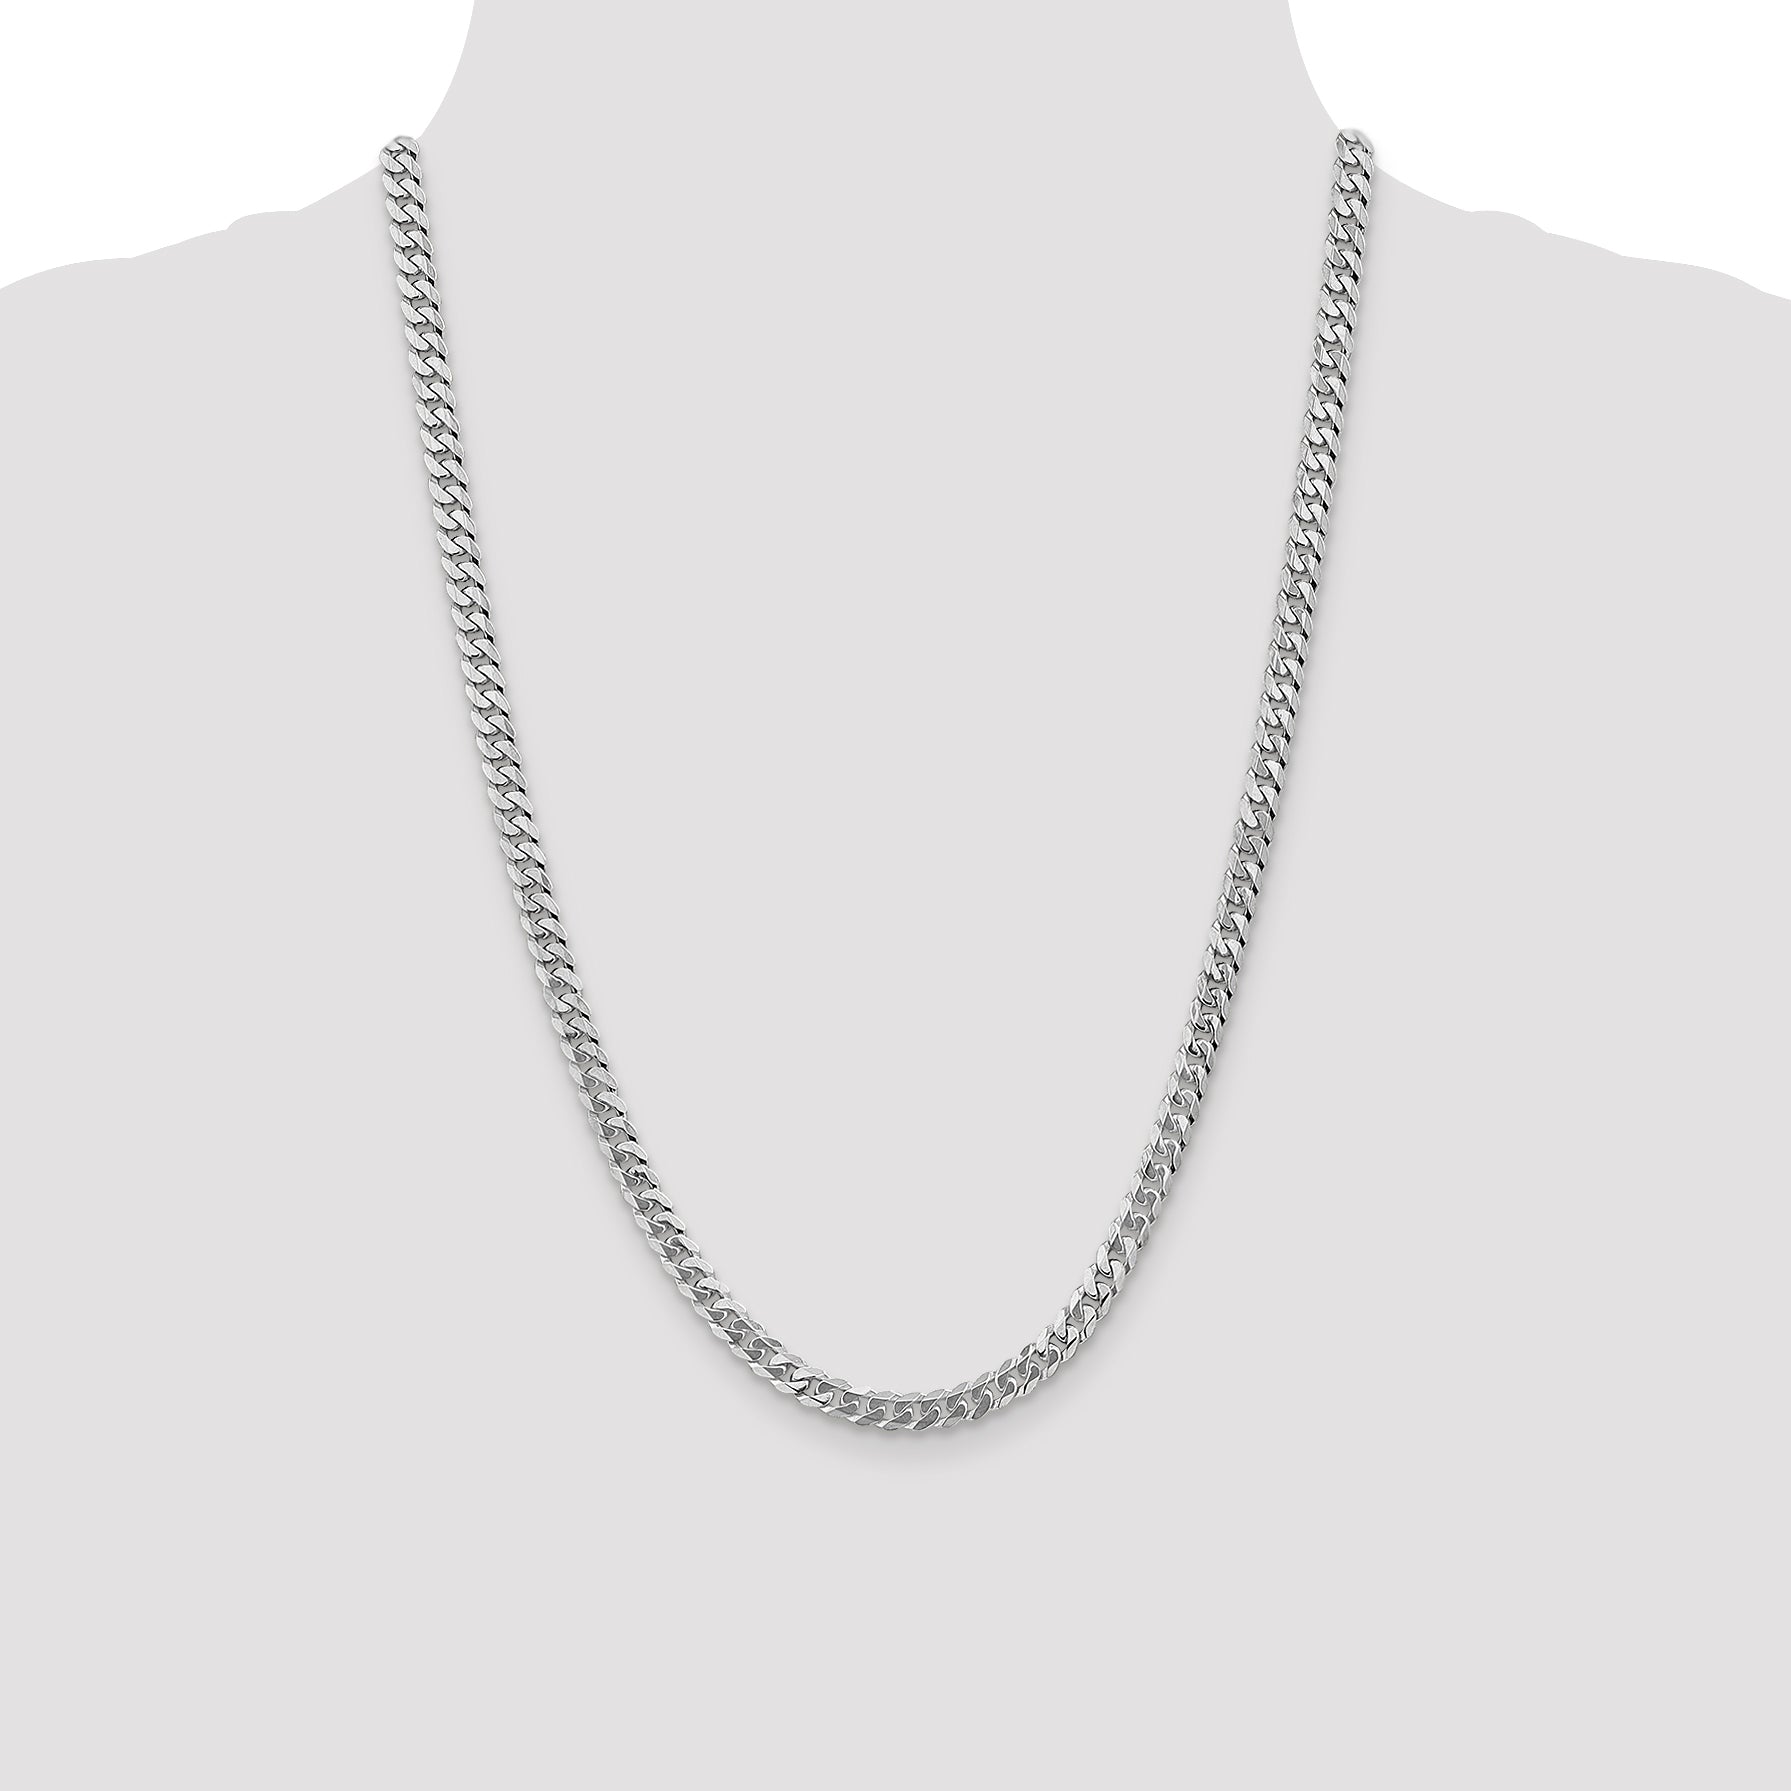 14K White Gold 18 inch 5.75mm Flat Beveled Curb with Lobster Clasp Chain